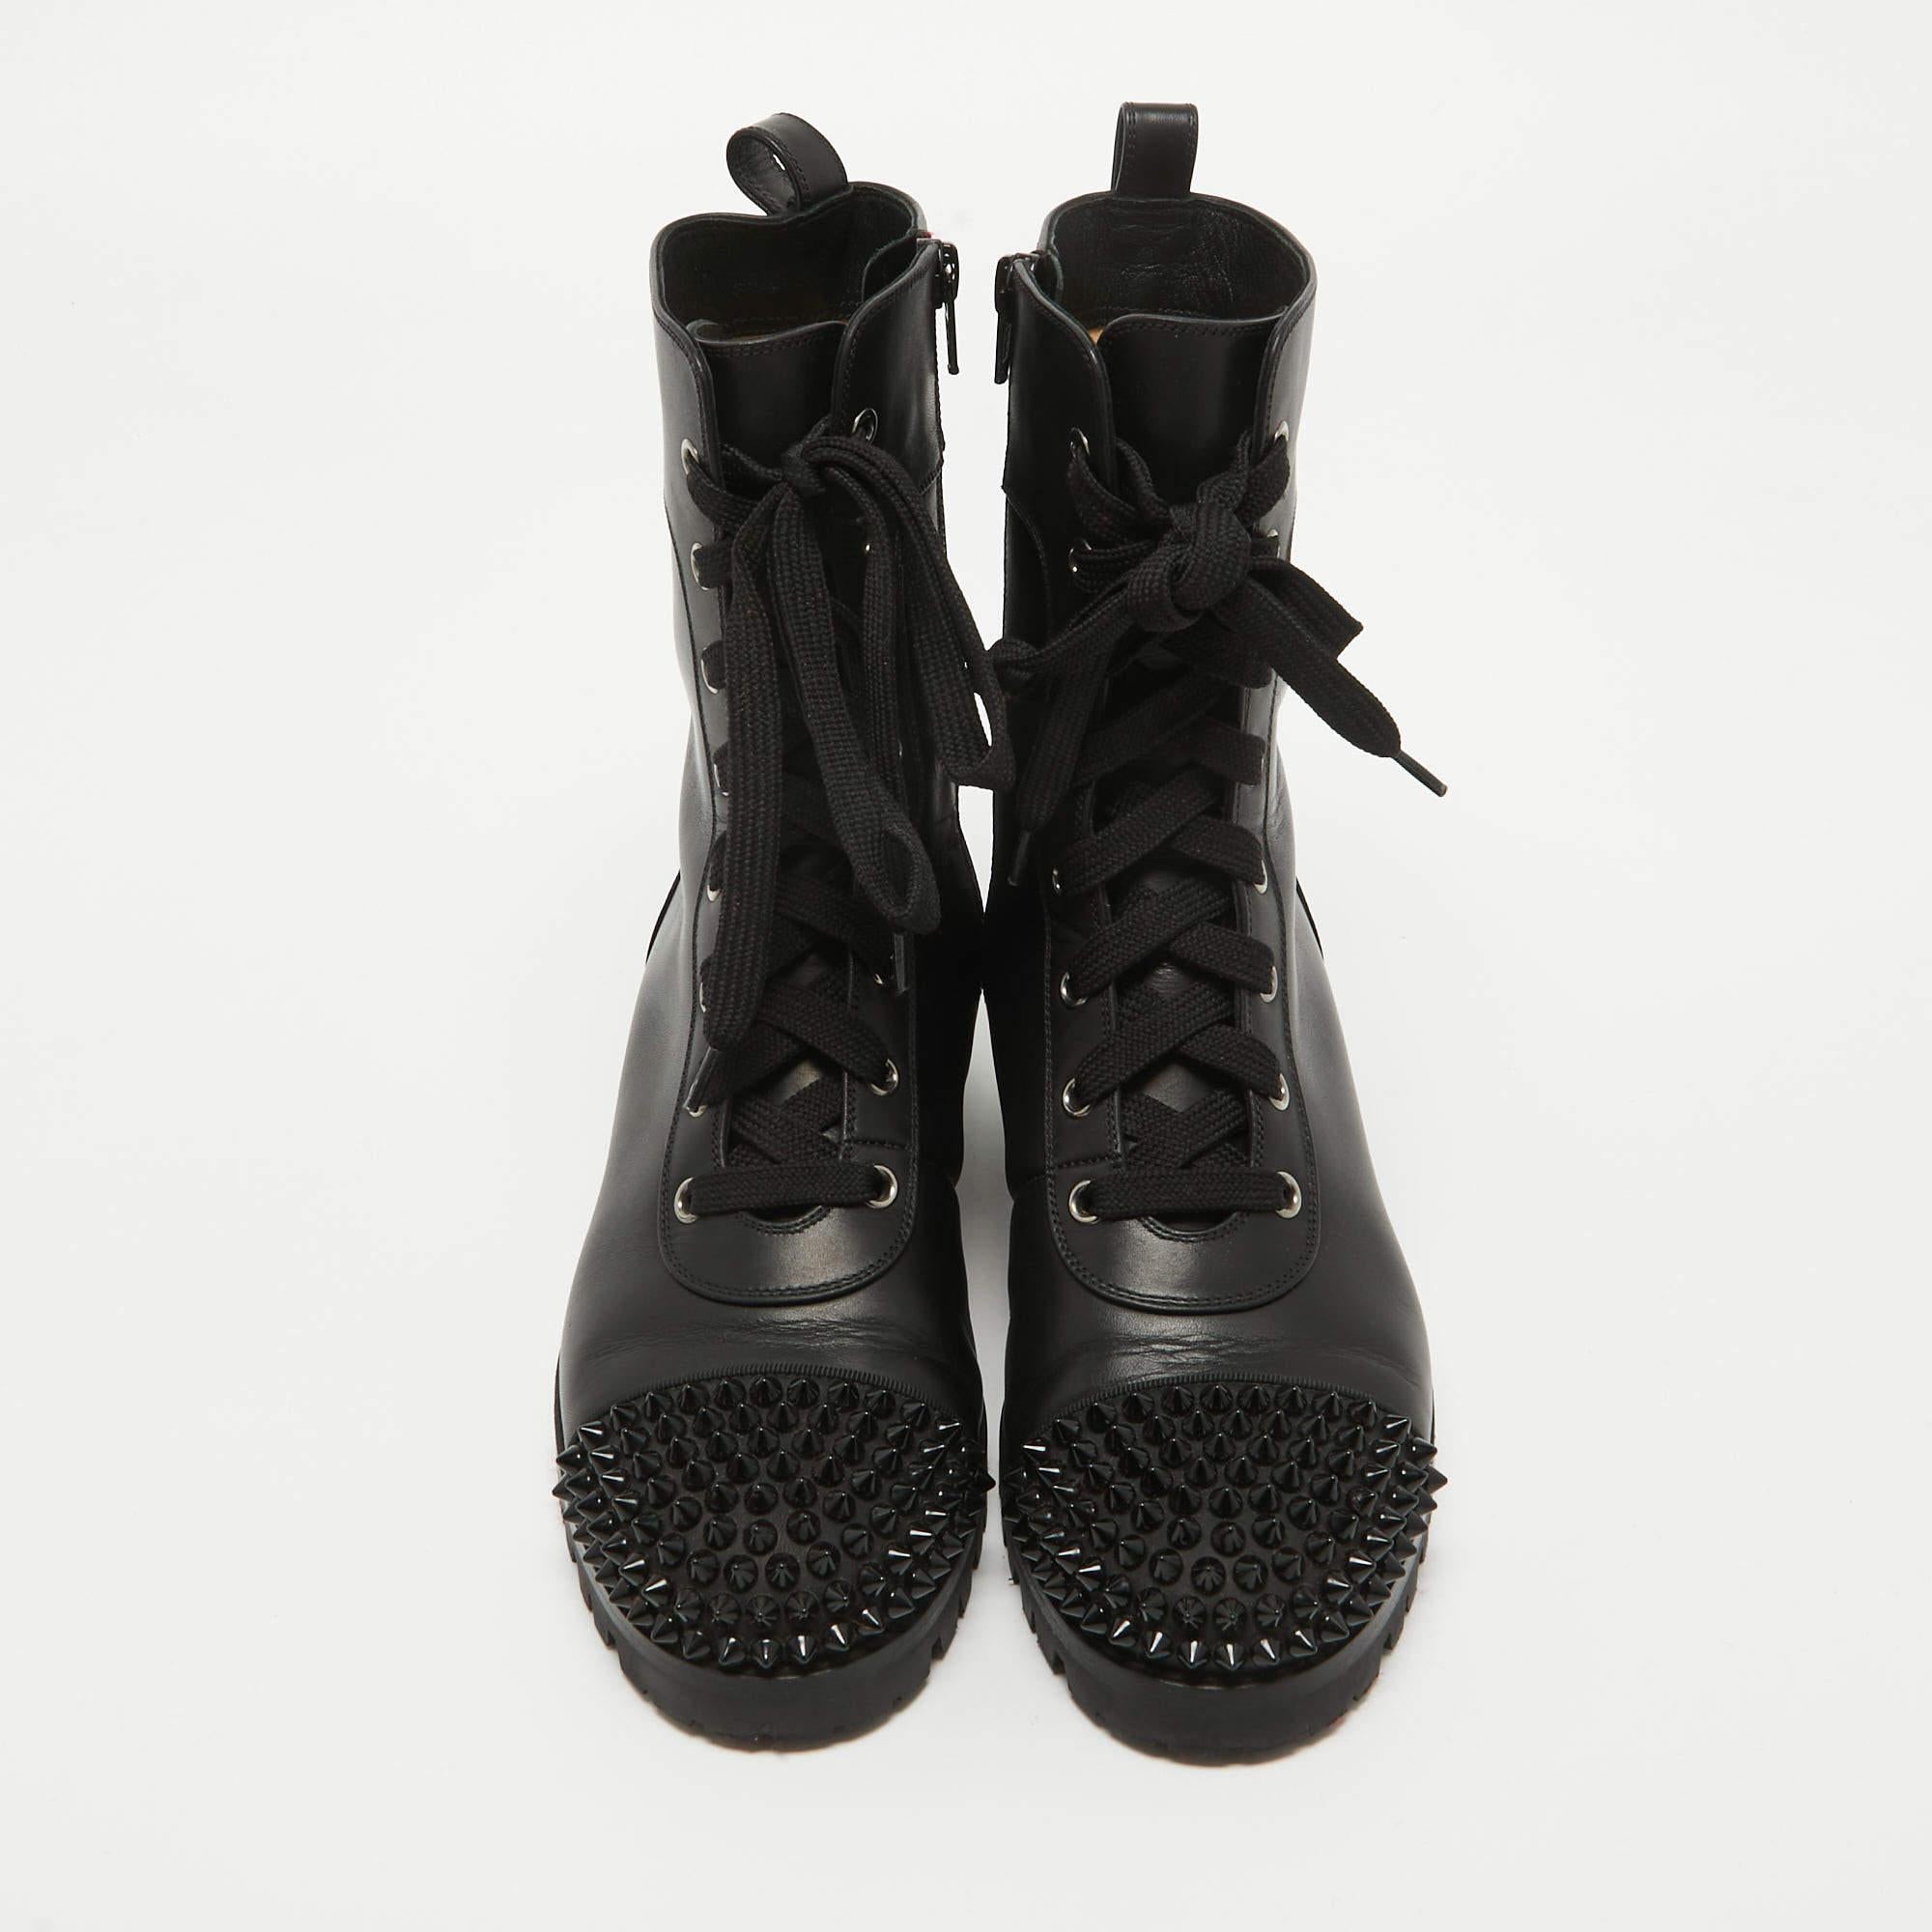 Christian Louboutin Black Leather TS Croc Spiked Ankle Boots Size 36 In Good Condition For Sale In Dubai, Al Qouz 2